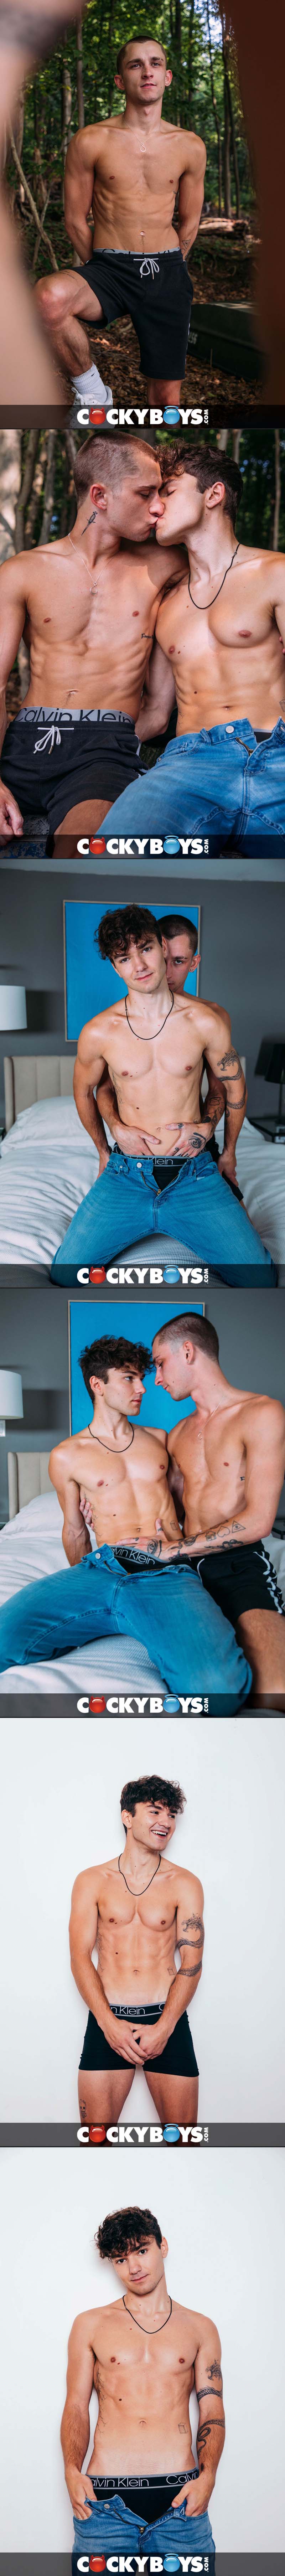 Newcomer Achilles Bottoms for Theo Brady at CockyBoys